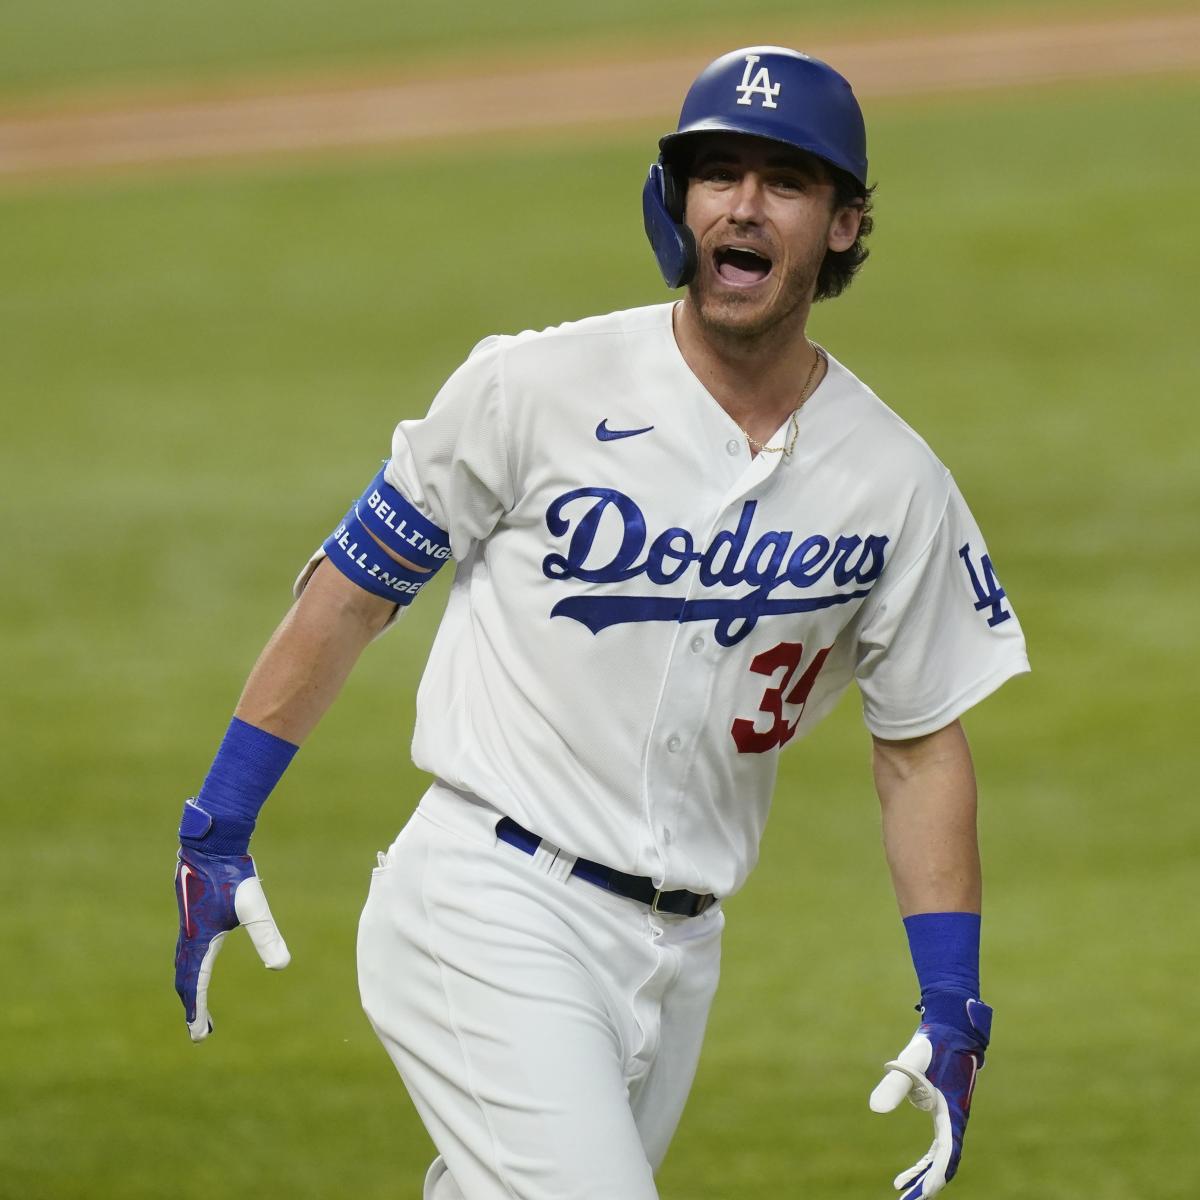 Dodgers Advance to 2020 World Series Behind Cody Bellinger's Late HR vs